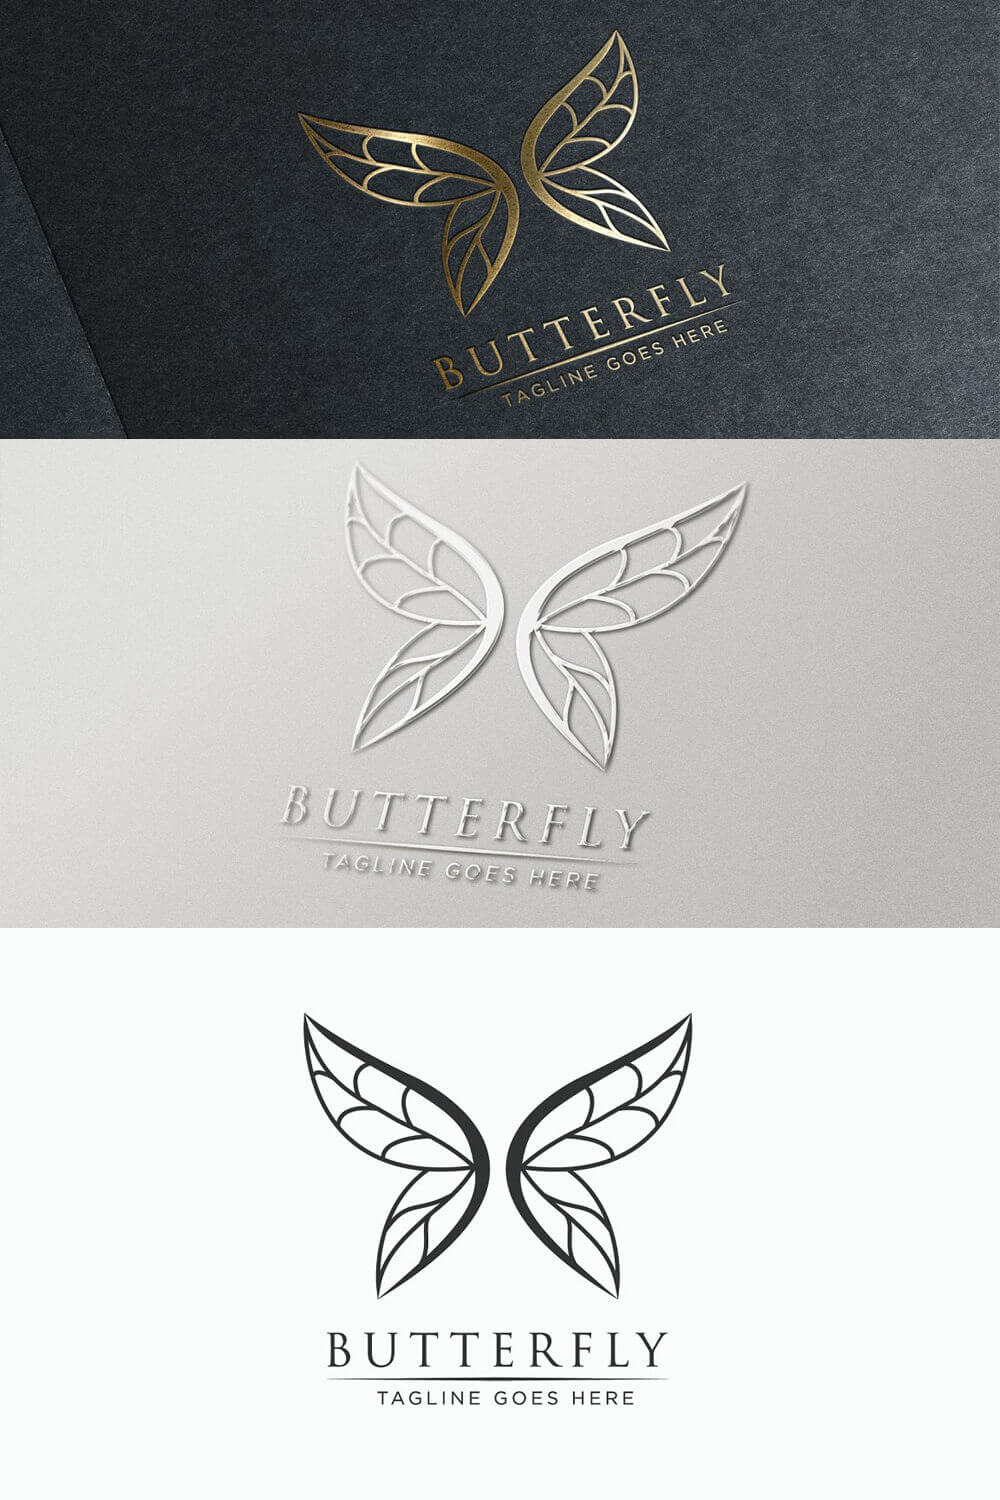 Butterfly logo in three color options: gold, silver, black.